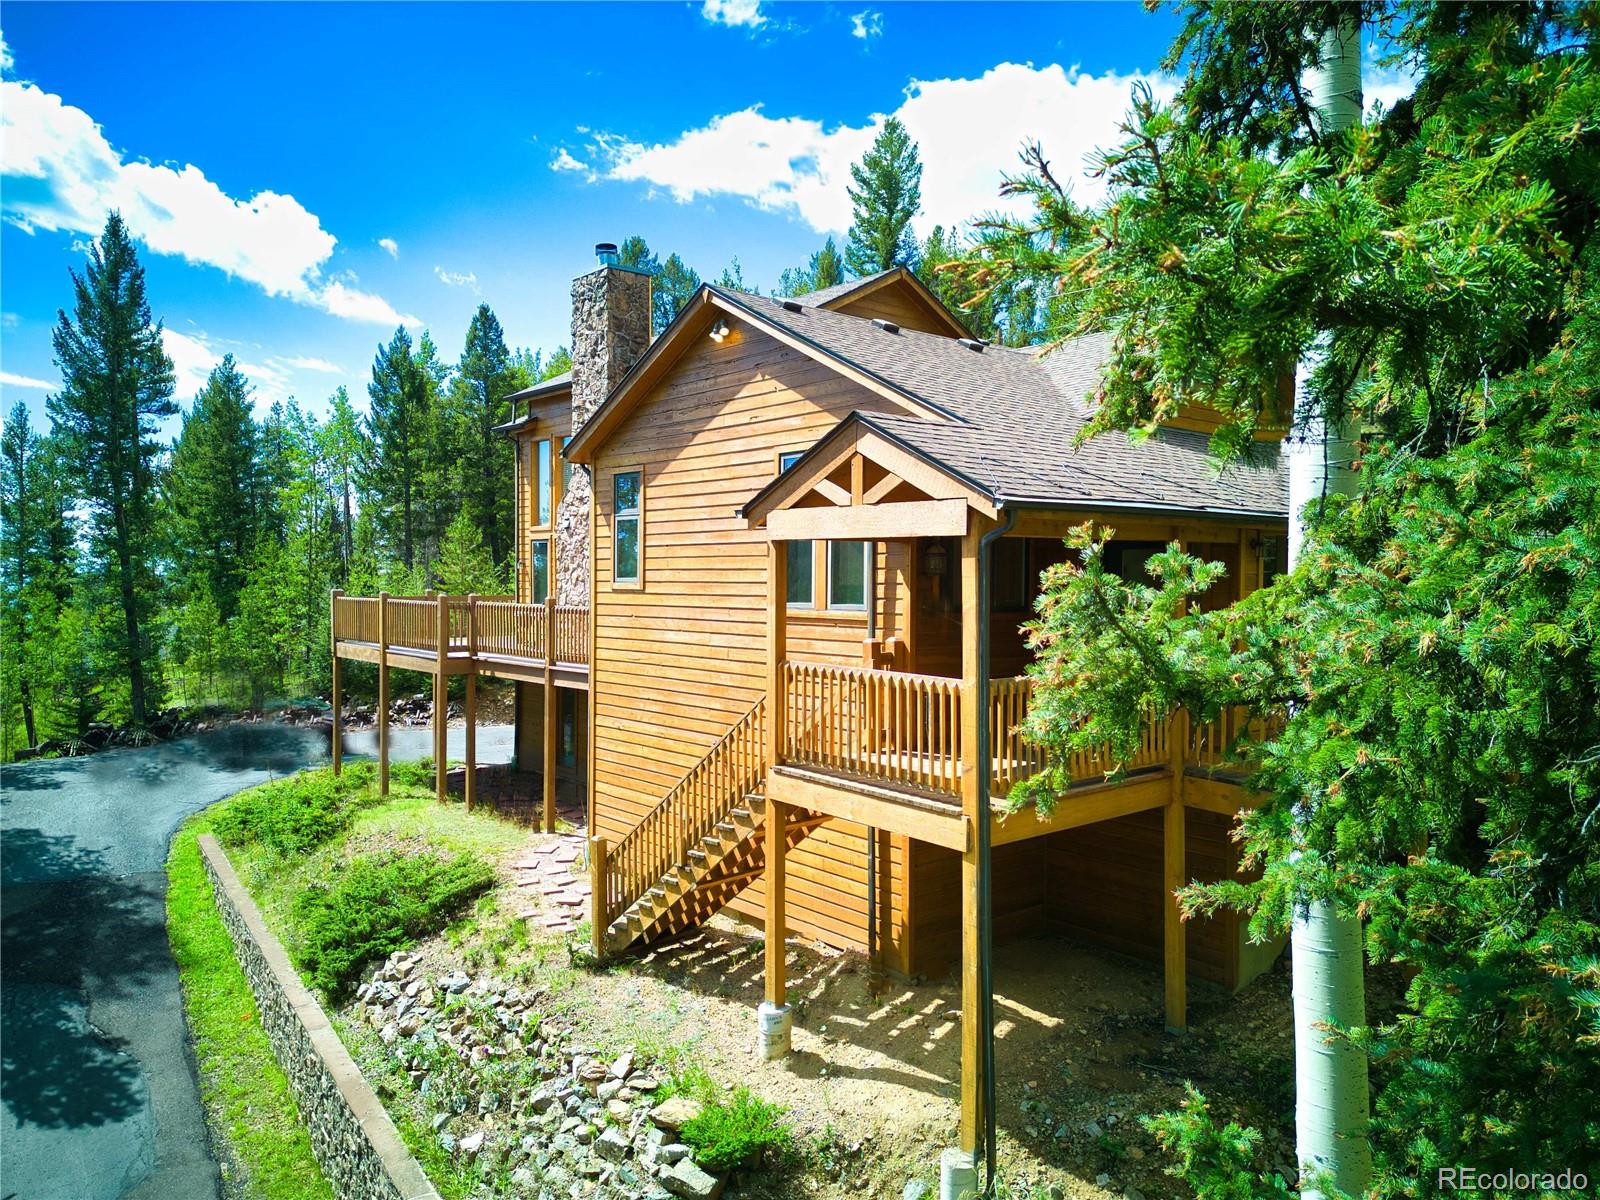 11549  nichols way, Conifer sold home. Closed on 2024-01-12 for $850,000.